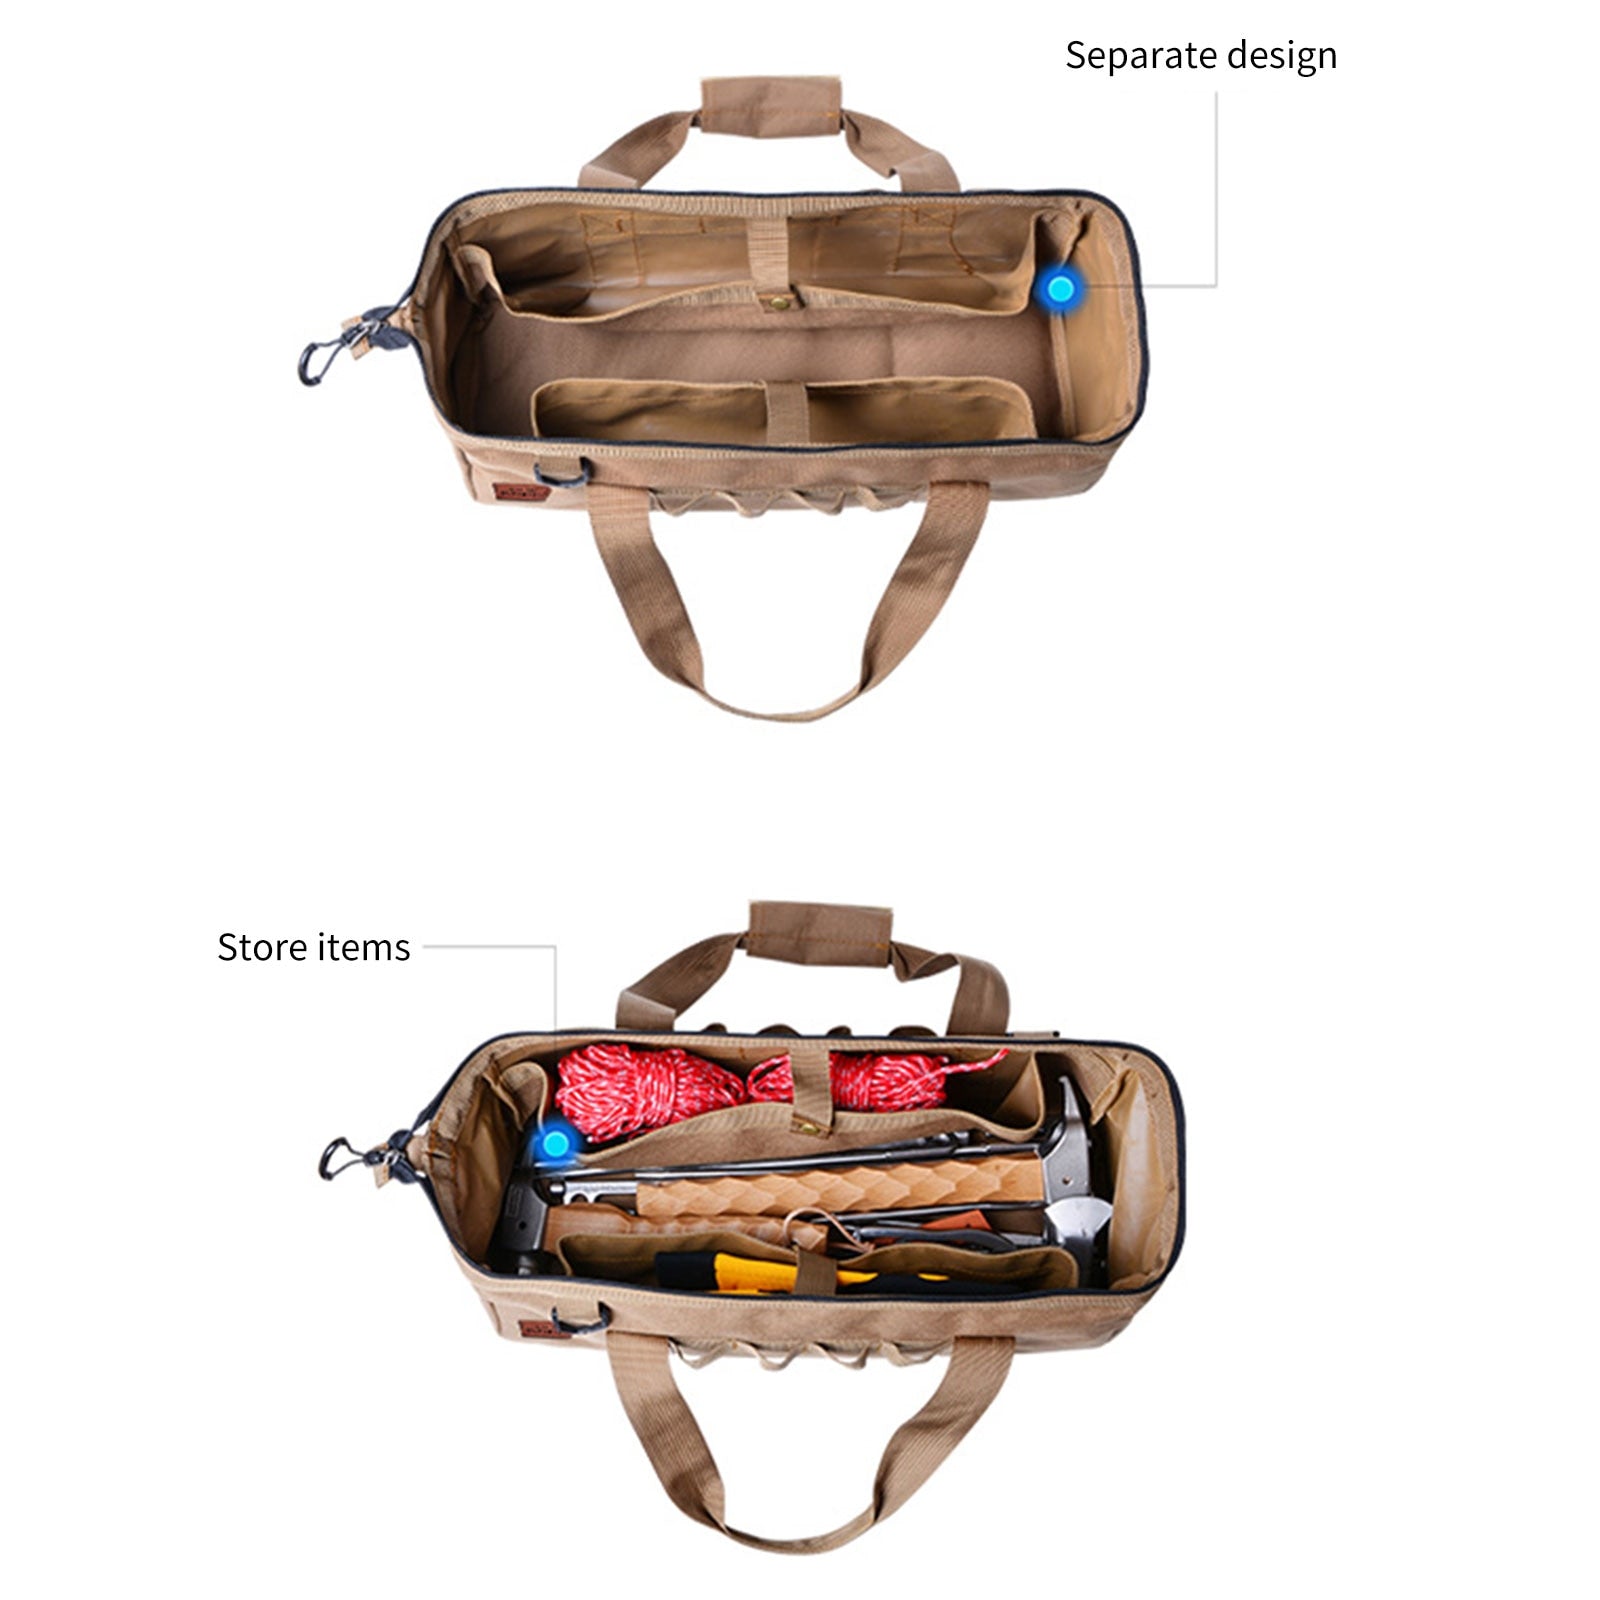 Tool Storage Bag Multi-purpose Heavy Duty Tool Pouch Large Capacity Camping Hiking Sundry Box Outdoor Tent Peg Nails Bags